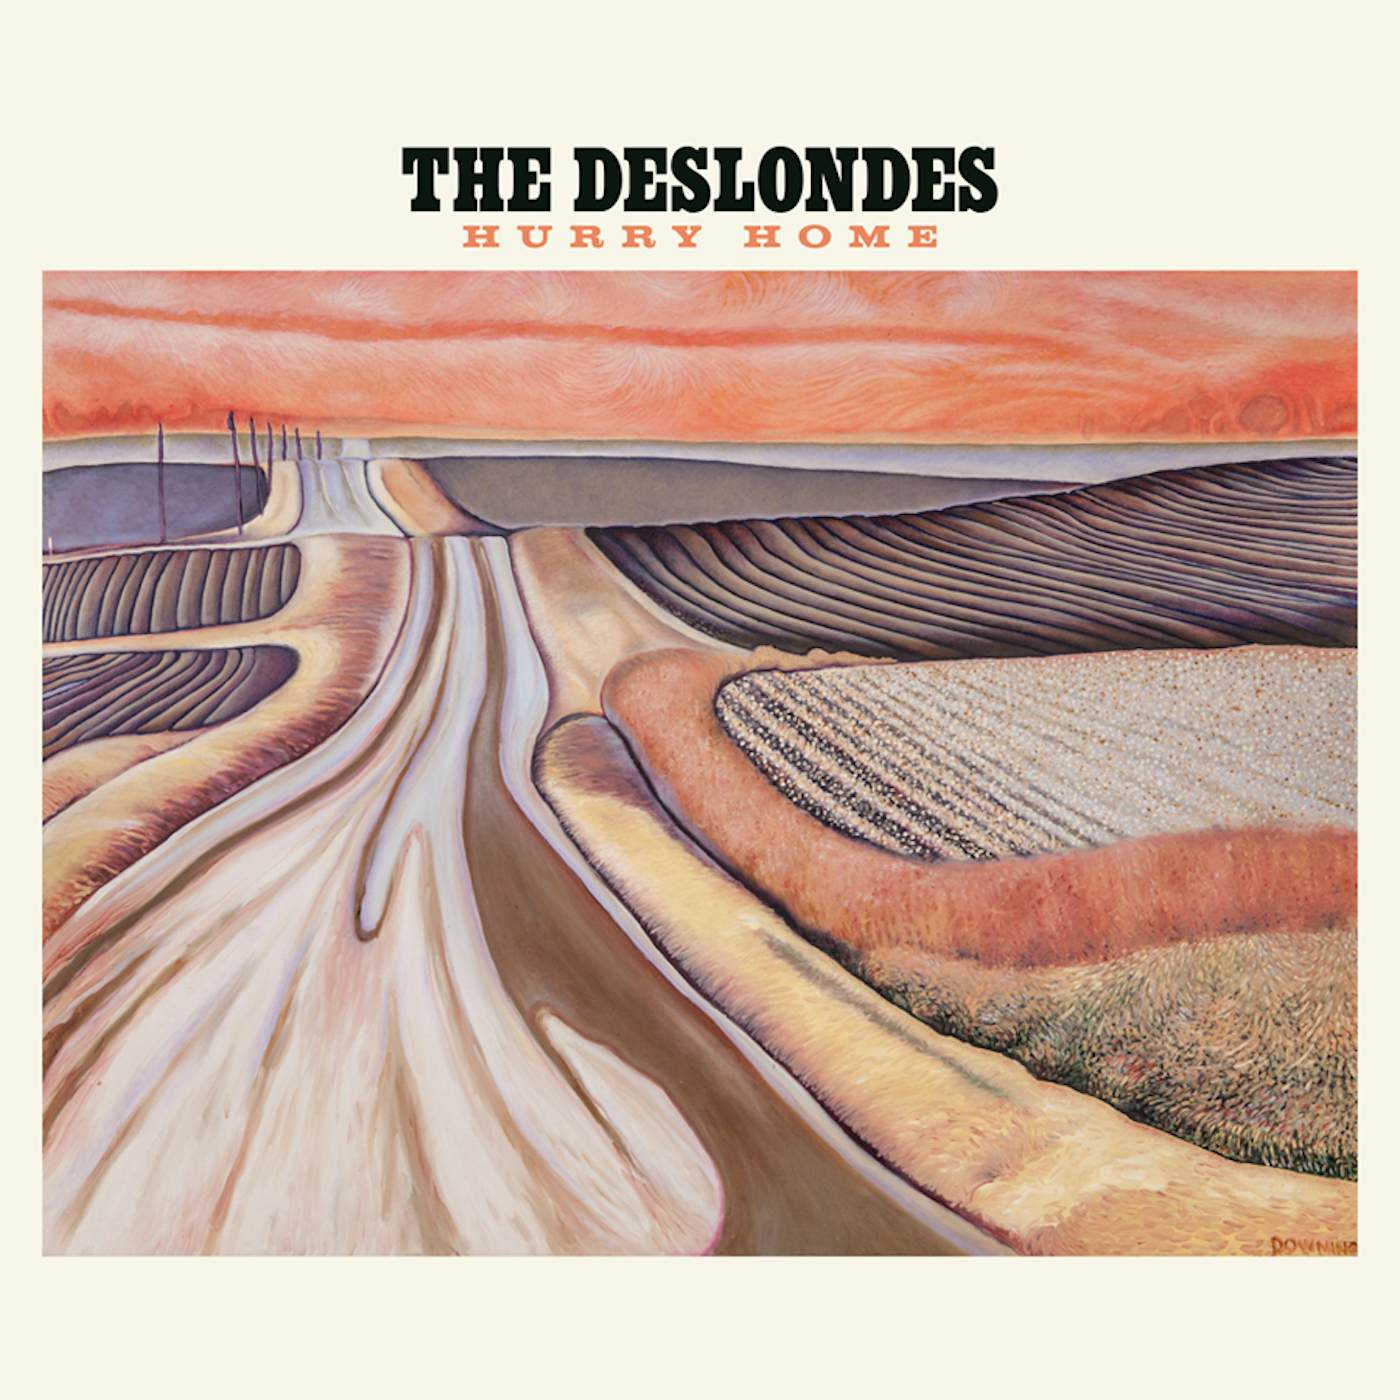 The Deslondes HURRY HOME CD